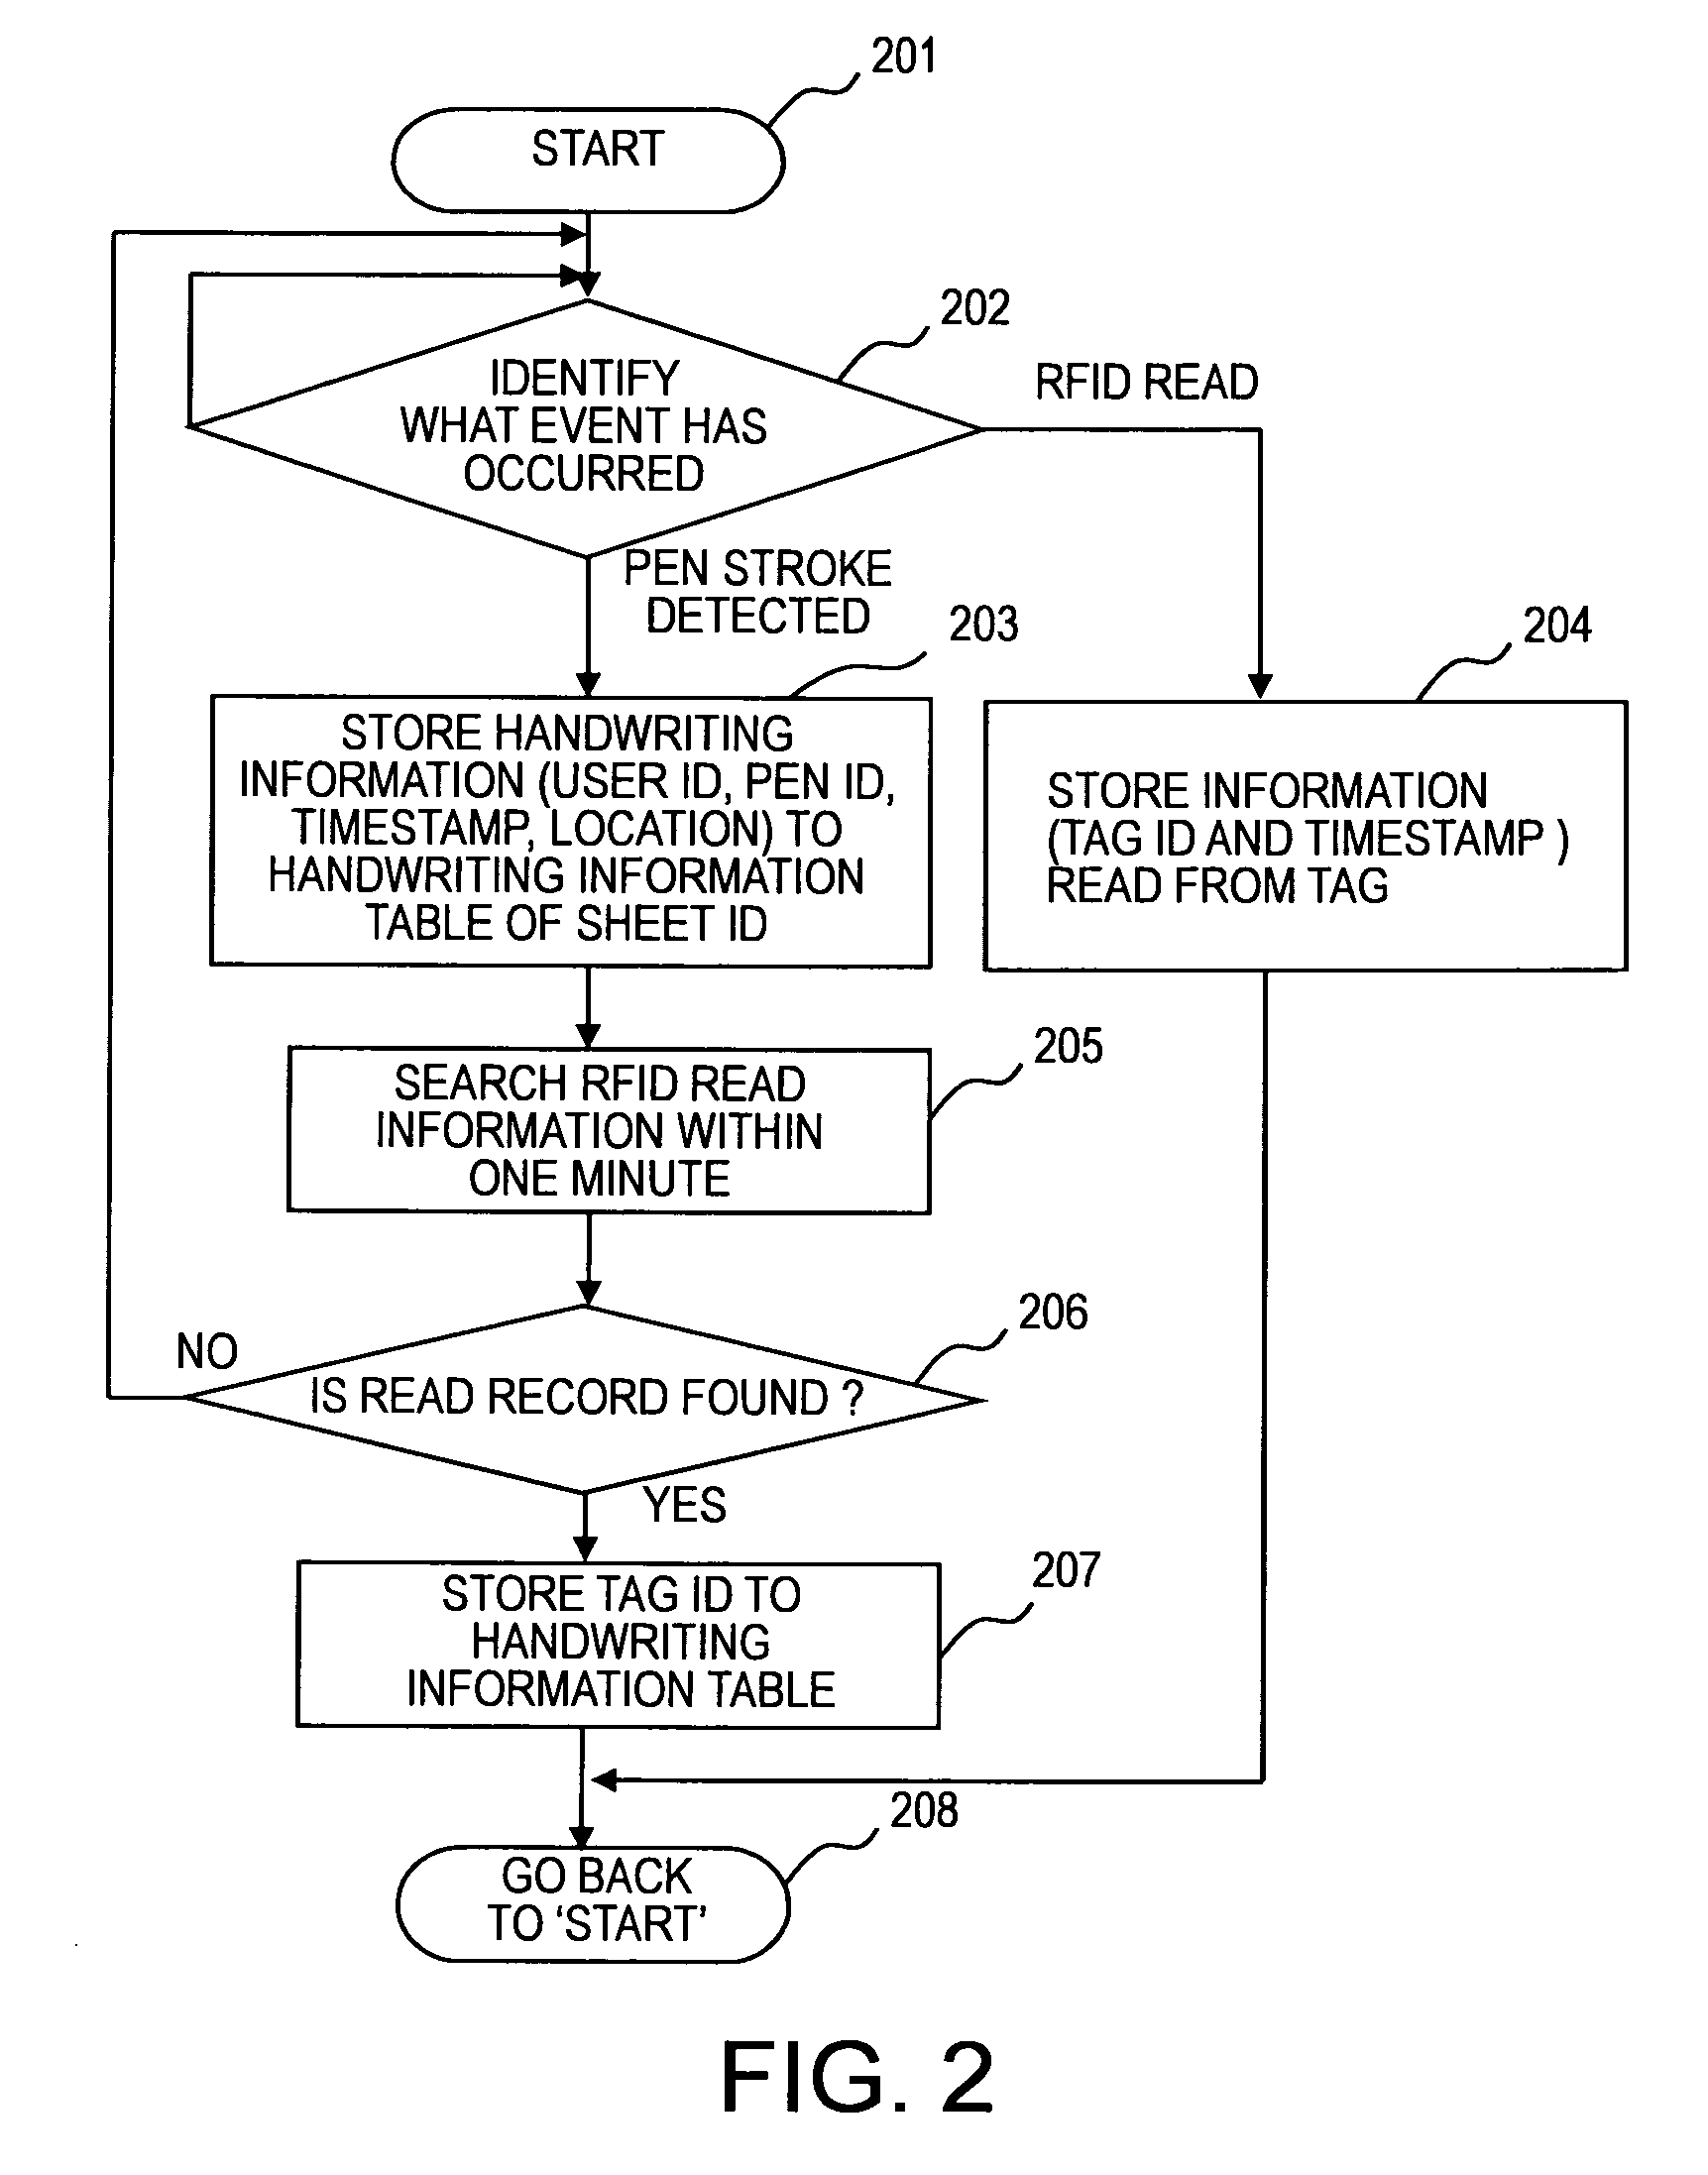 System and method for factory work logging